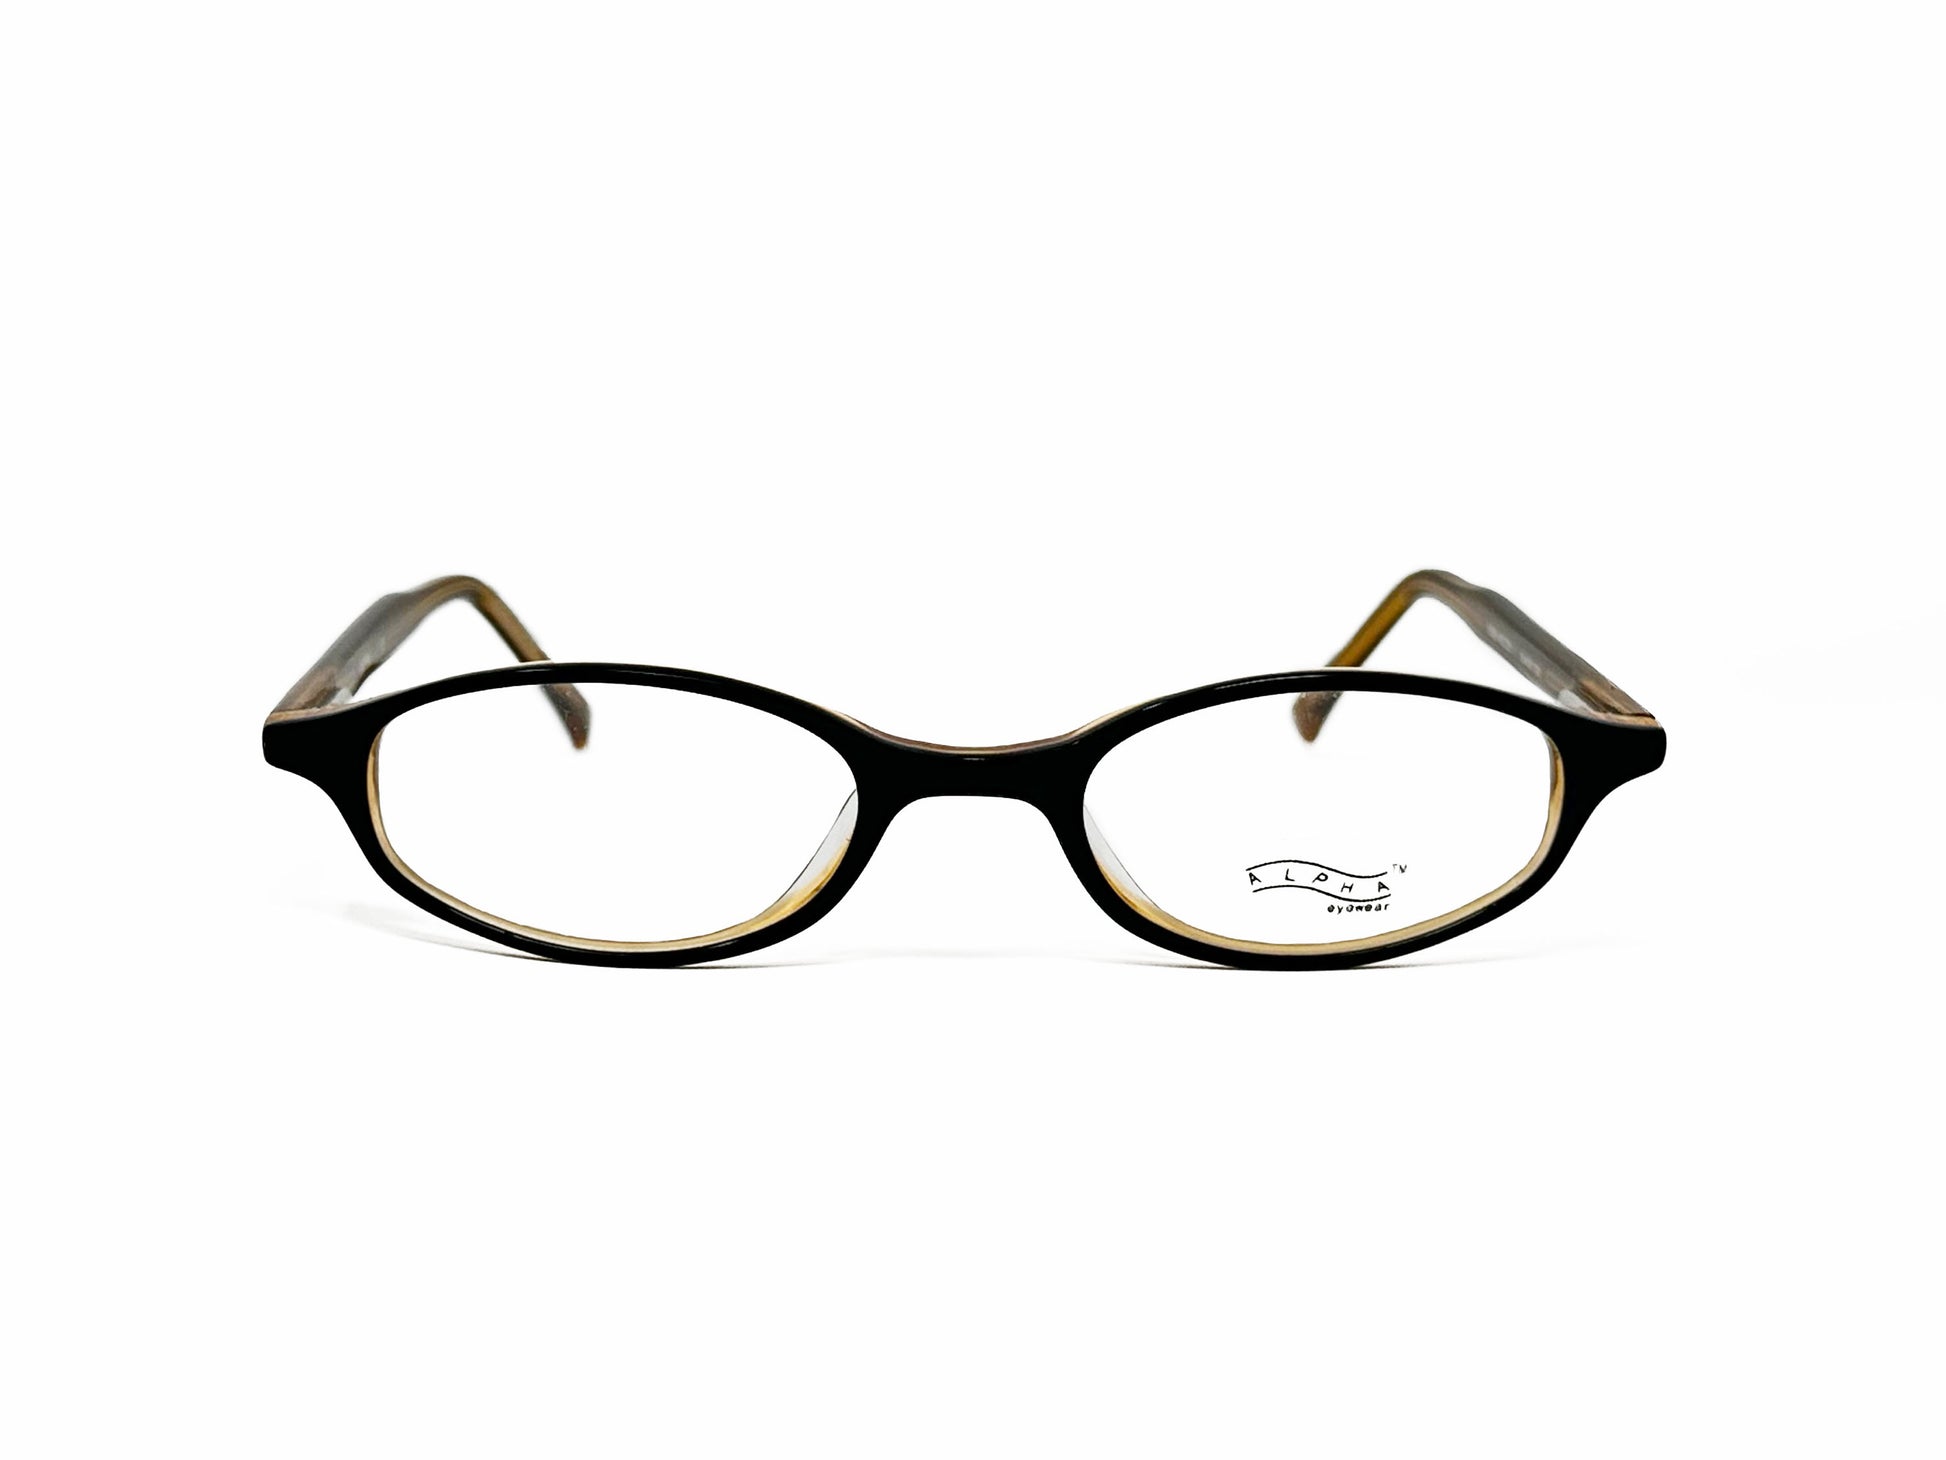 Alpha oval, acetate optical frame. Model: 0329. Color: Black C65 - Black with cream accents. Front view.